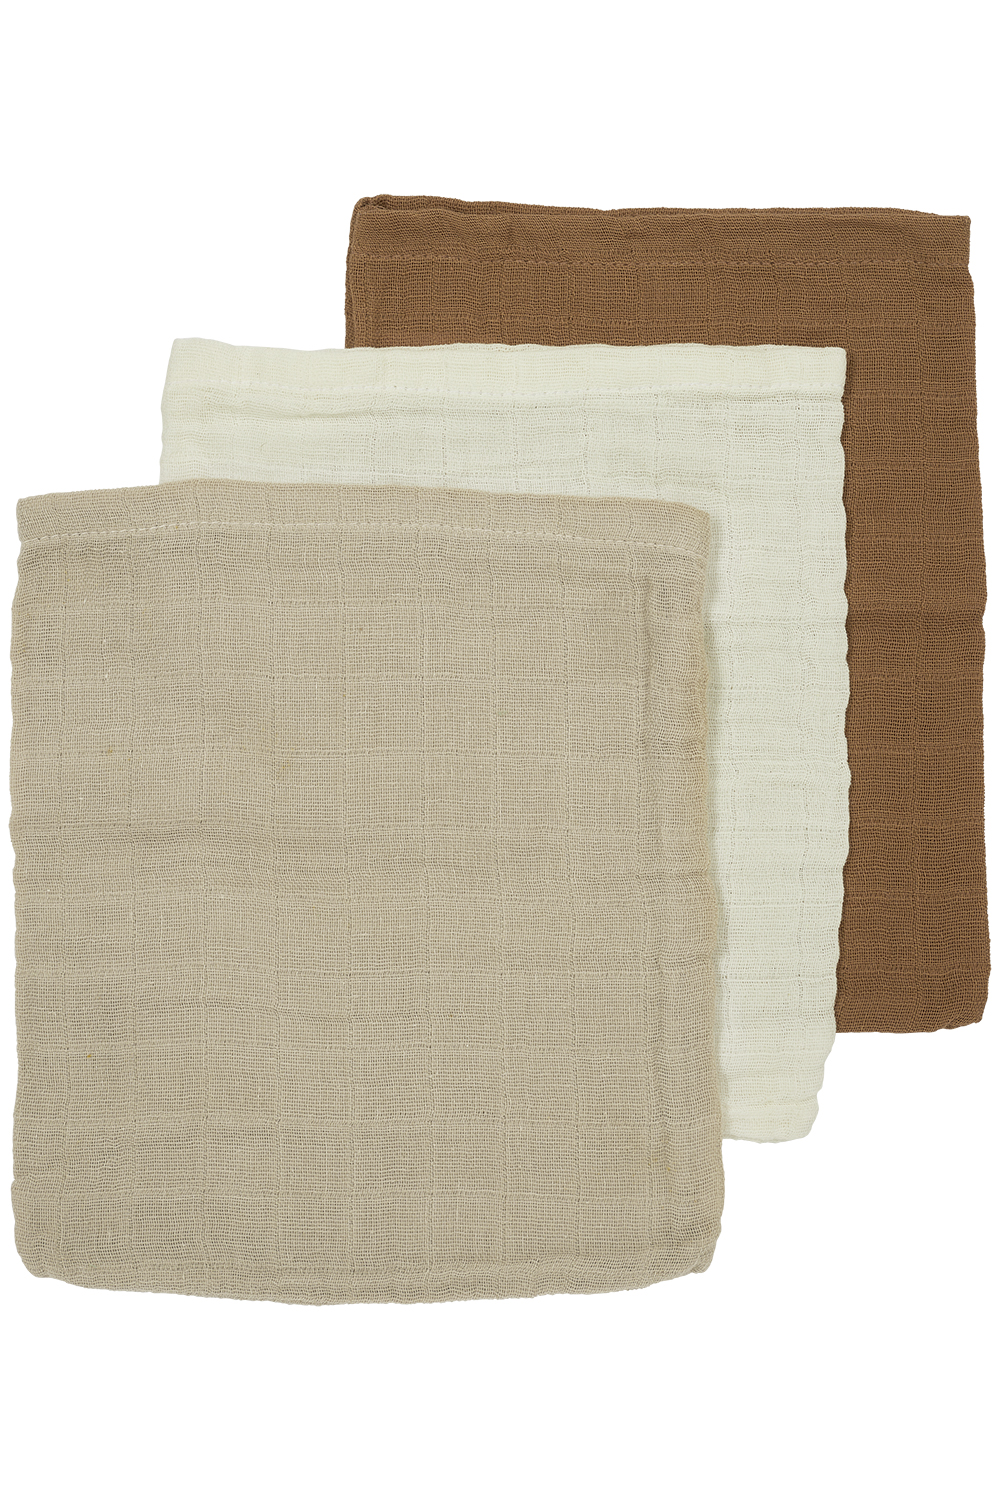 Waschhandschuhe 3er pack musselin Uni - offwhite/sand/toffee - 20x17cm